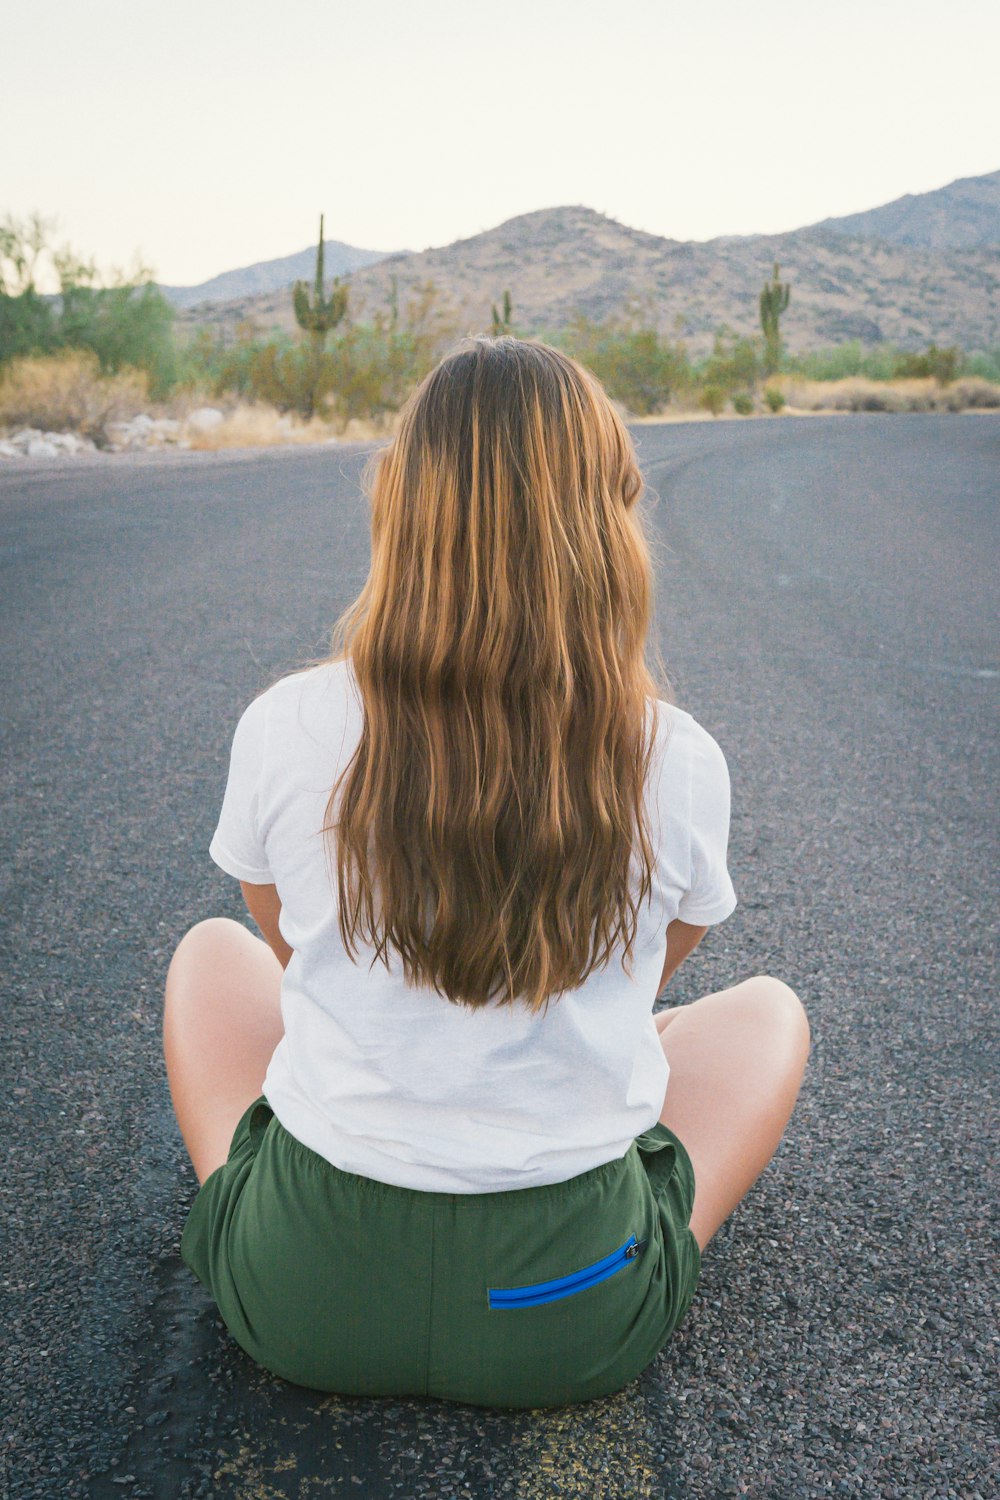 woman in white t-shirt and green shorts sitting on gray concrete road during daytime